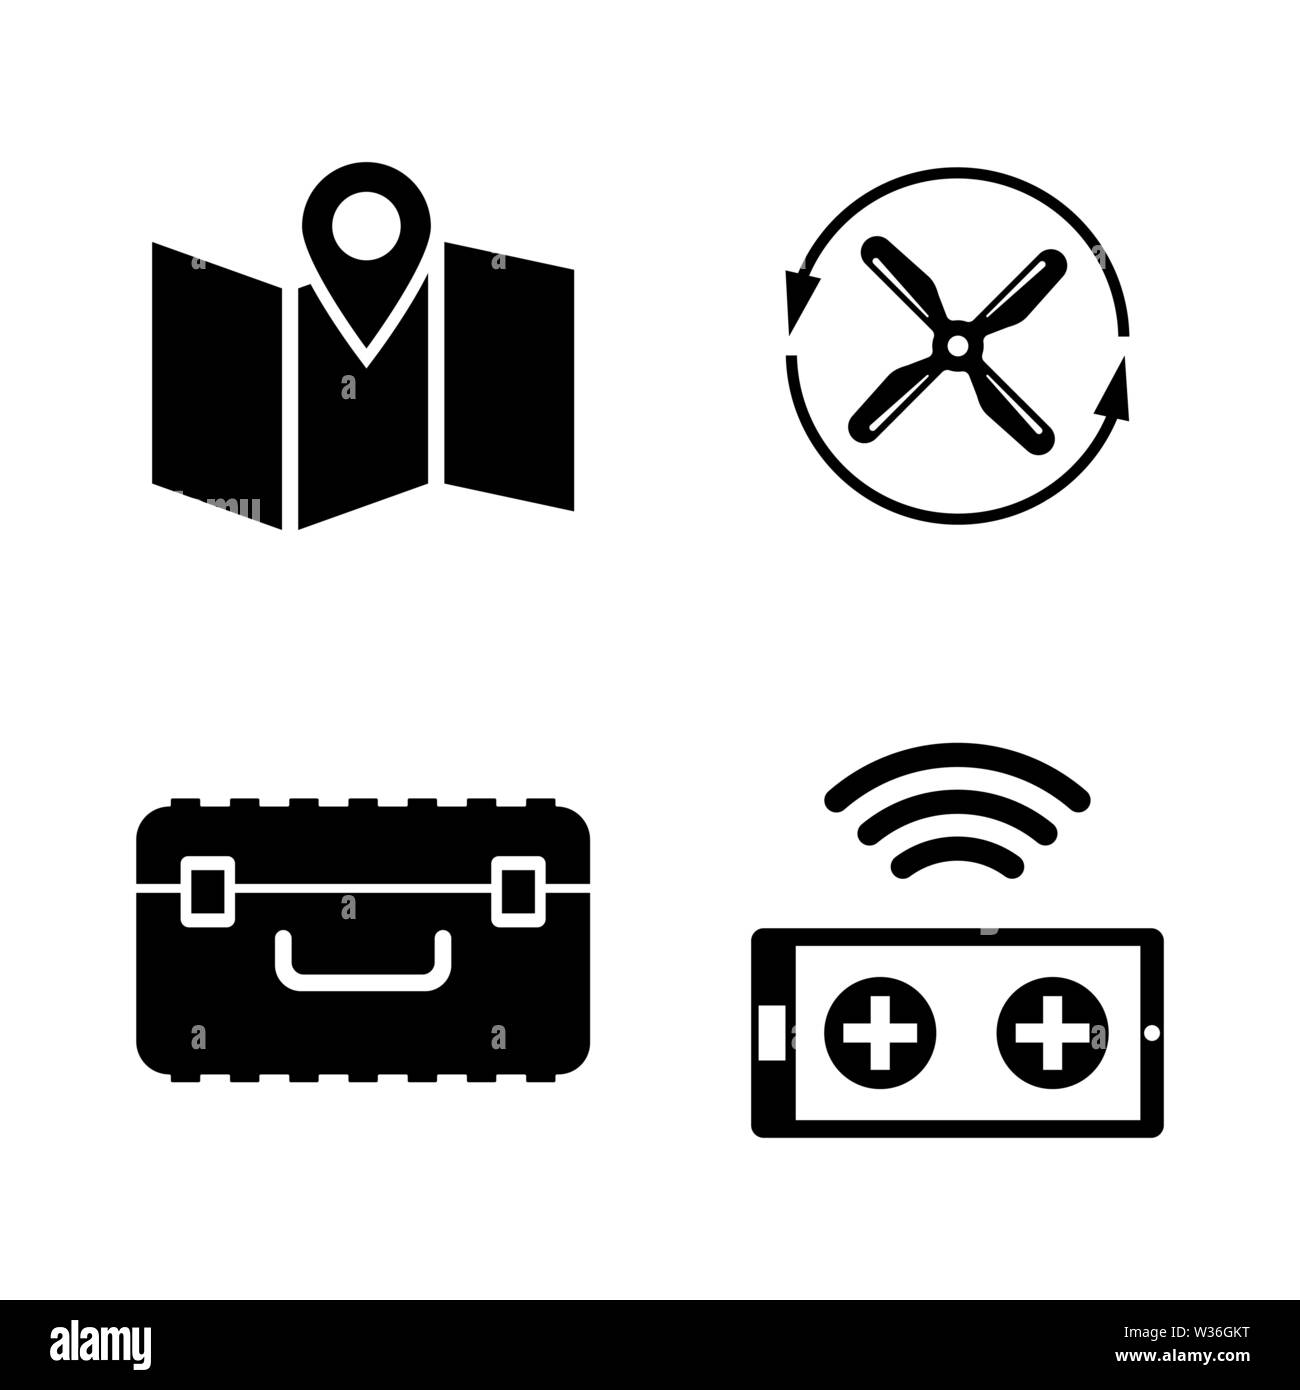 Quadrocopter. Simple Related Vector Icons Set for Video, Mobile Apps, Web Sites, Print Projects and Your Design. Black Flat Illustration on White Back Stock Vector